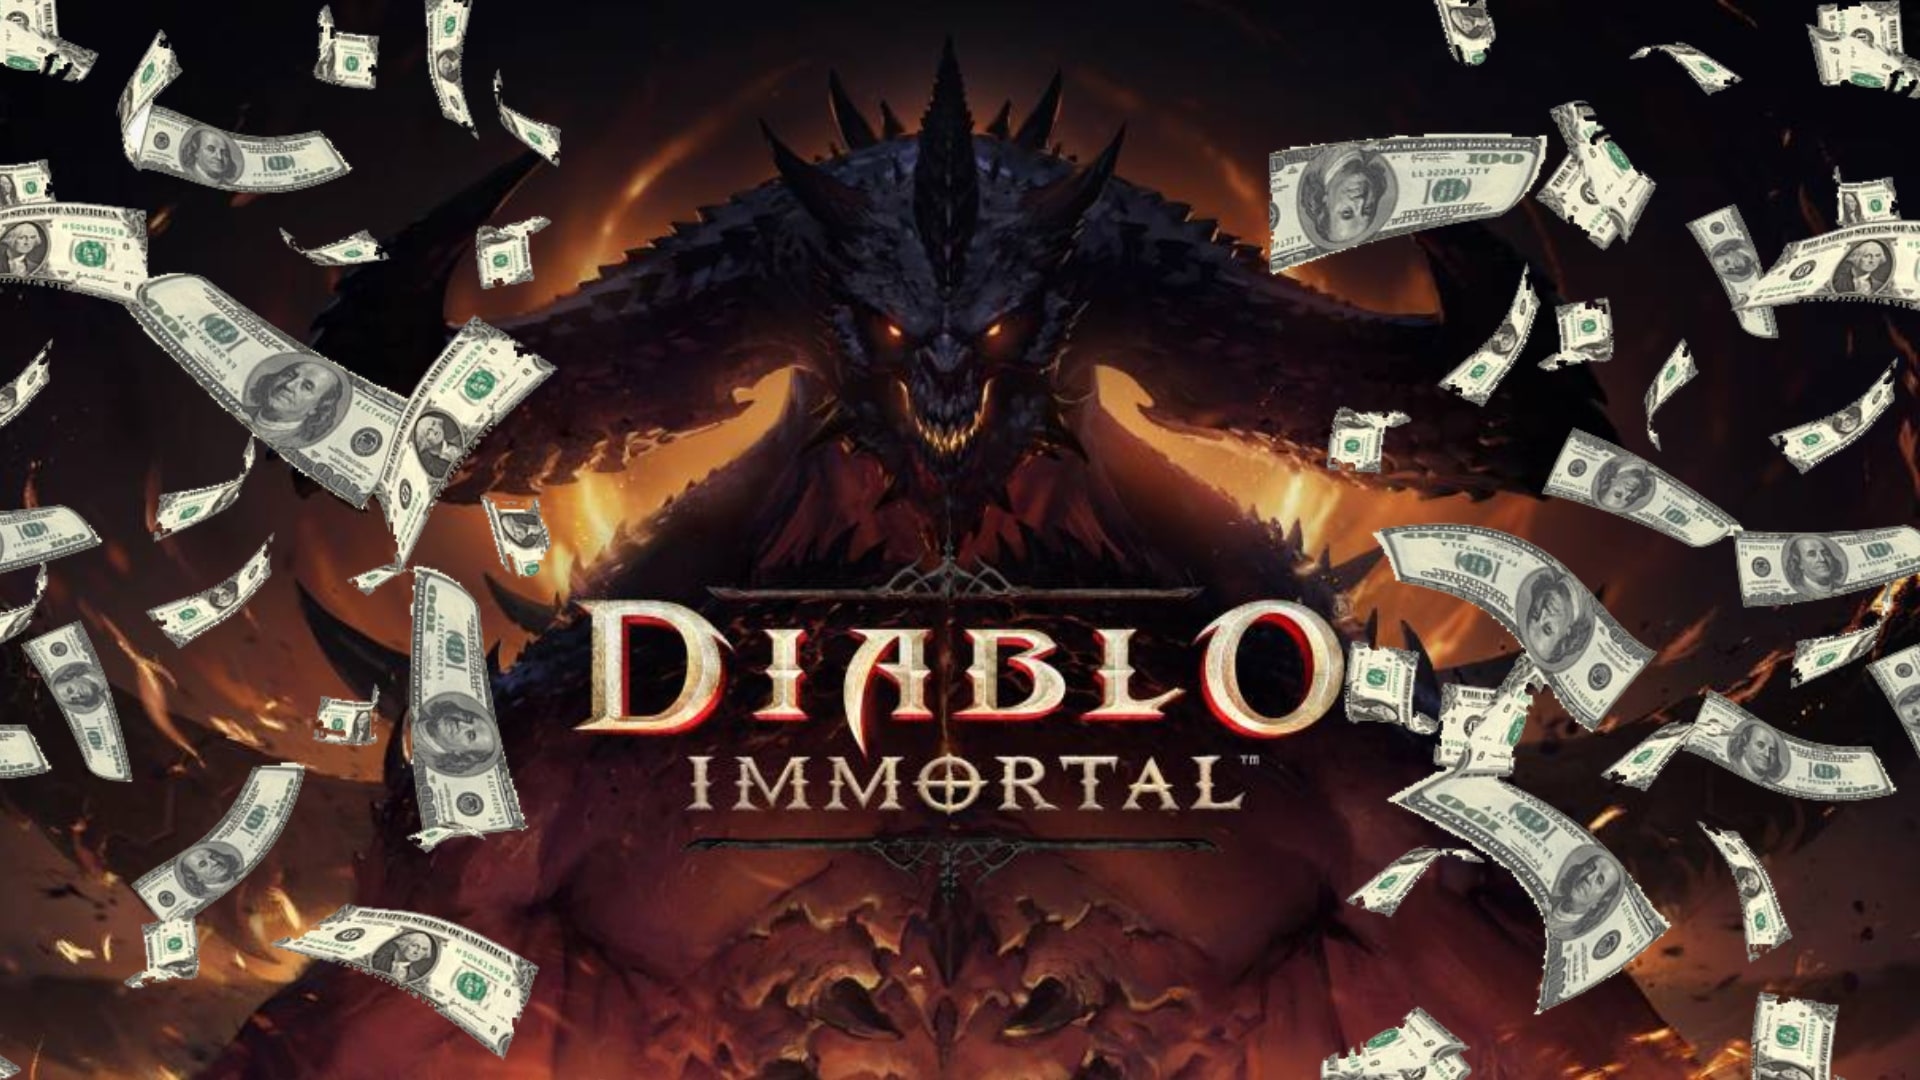 Dianlo-Immortal-Gets-24-million-at-players- cost-GamersRD